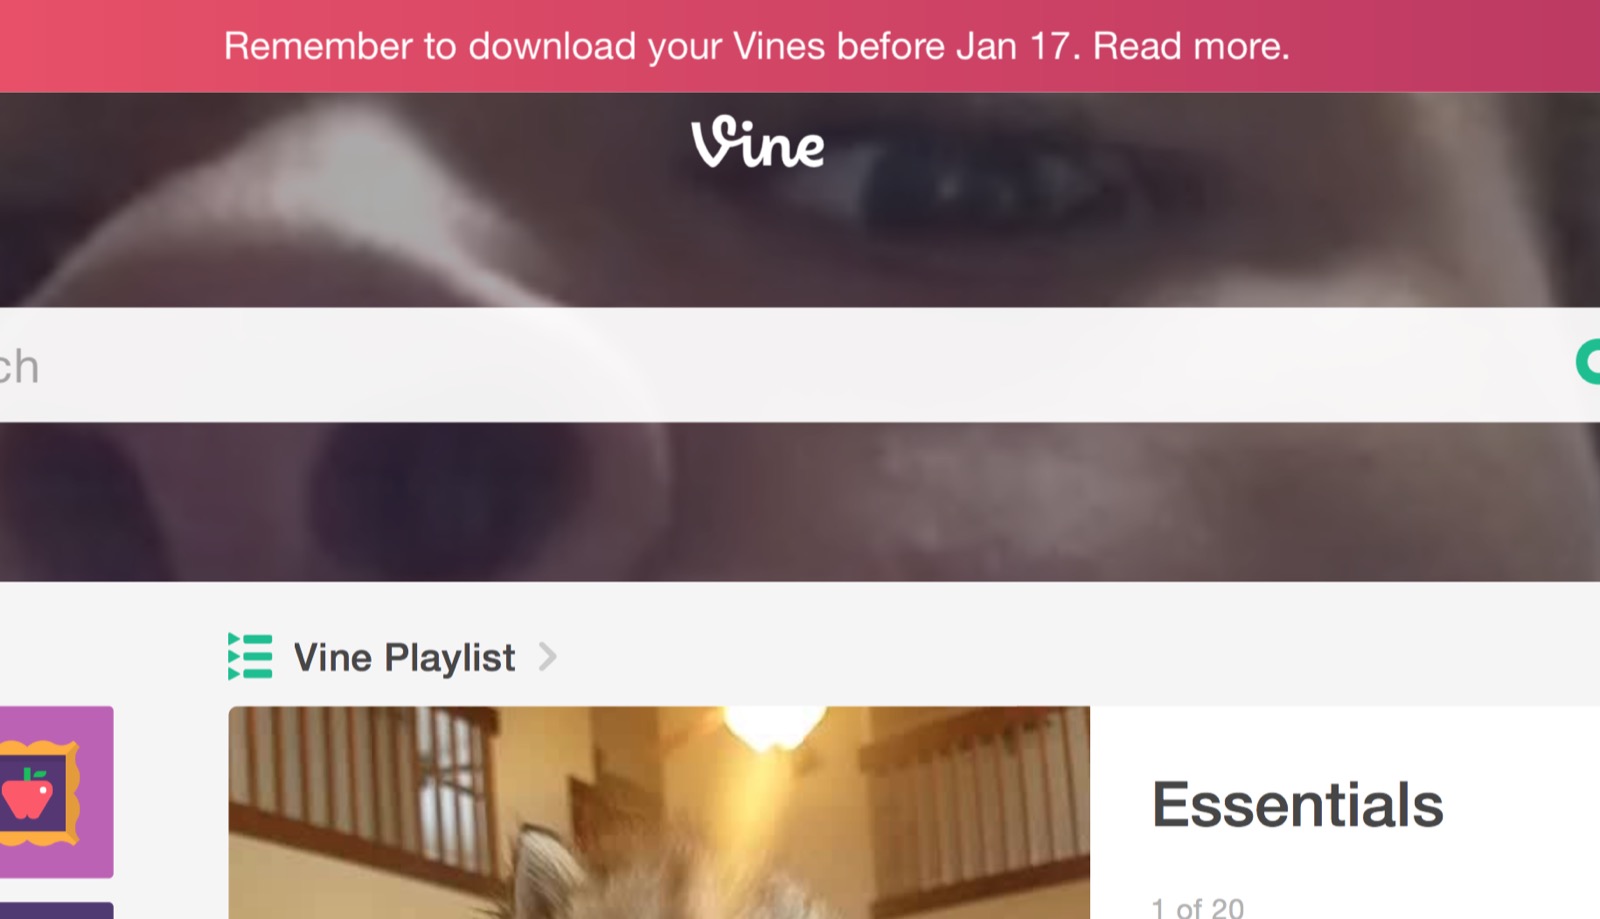 Less than two weeks to rescue your Vines